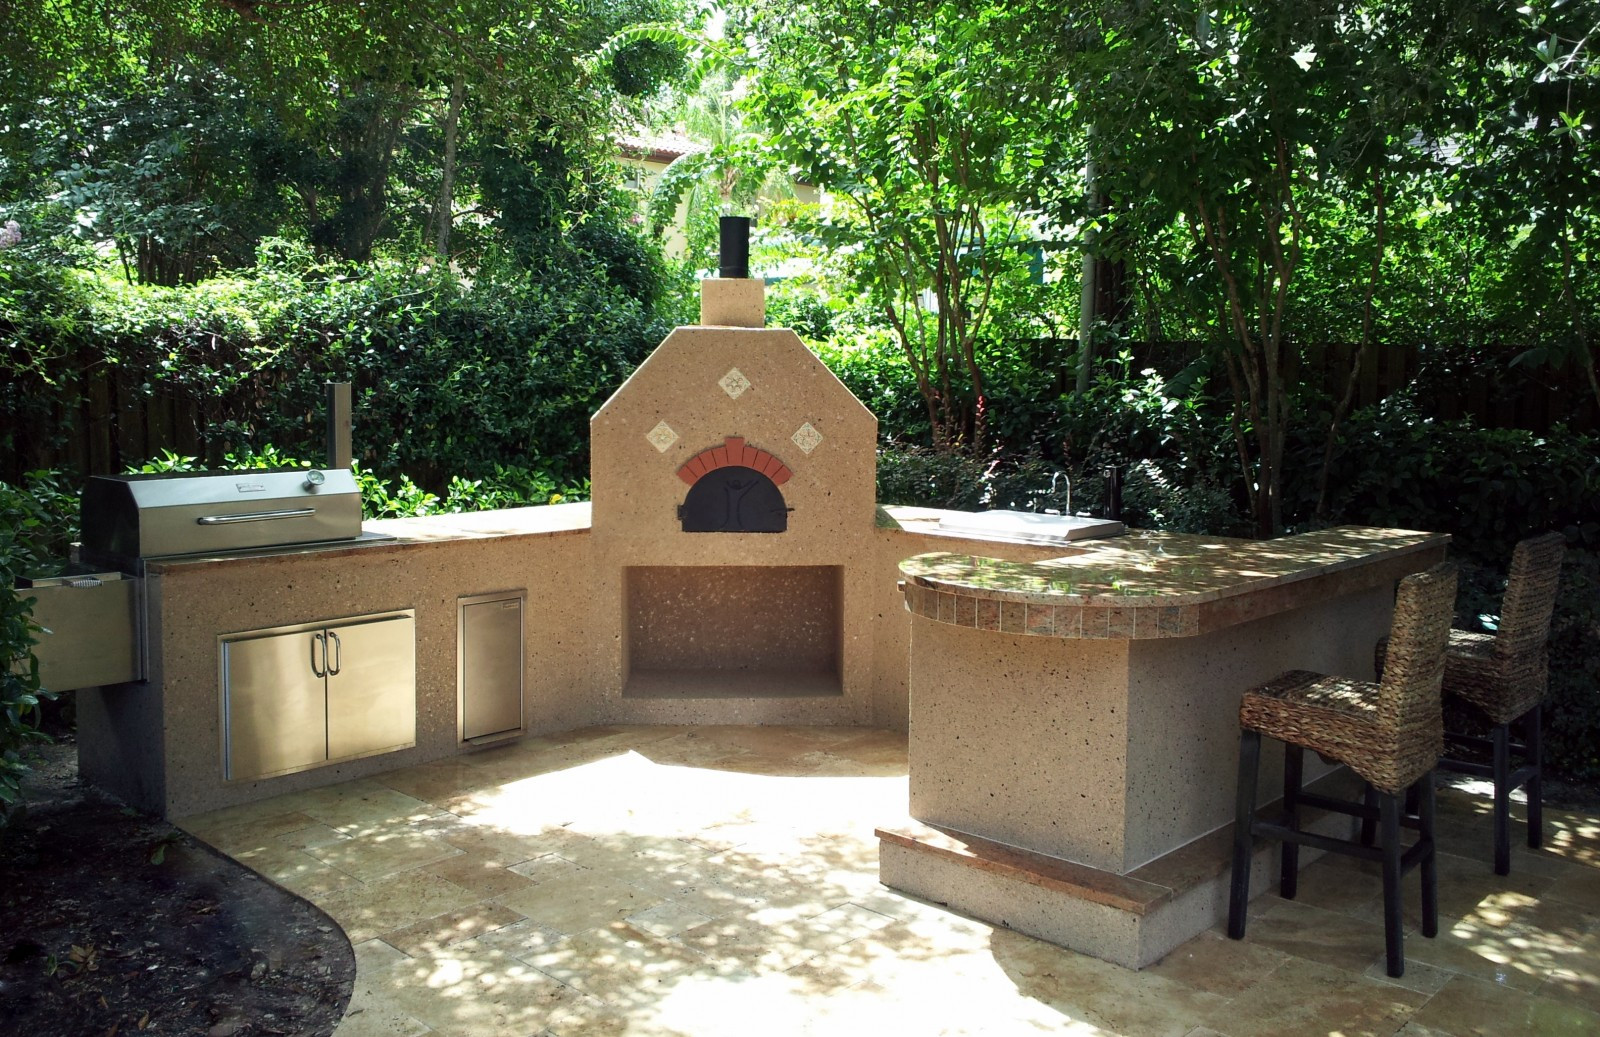 Outdoor Kitchen Charcoal Grill
 Creative Outdoor Kitchens Charcoal Grills and Smokers